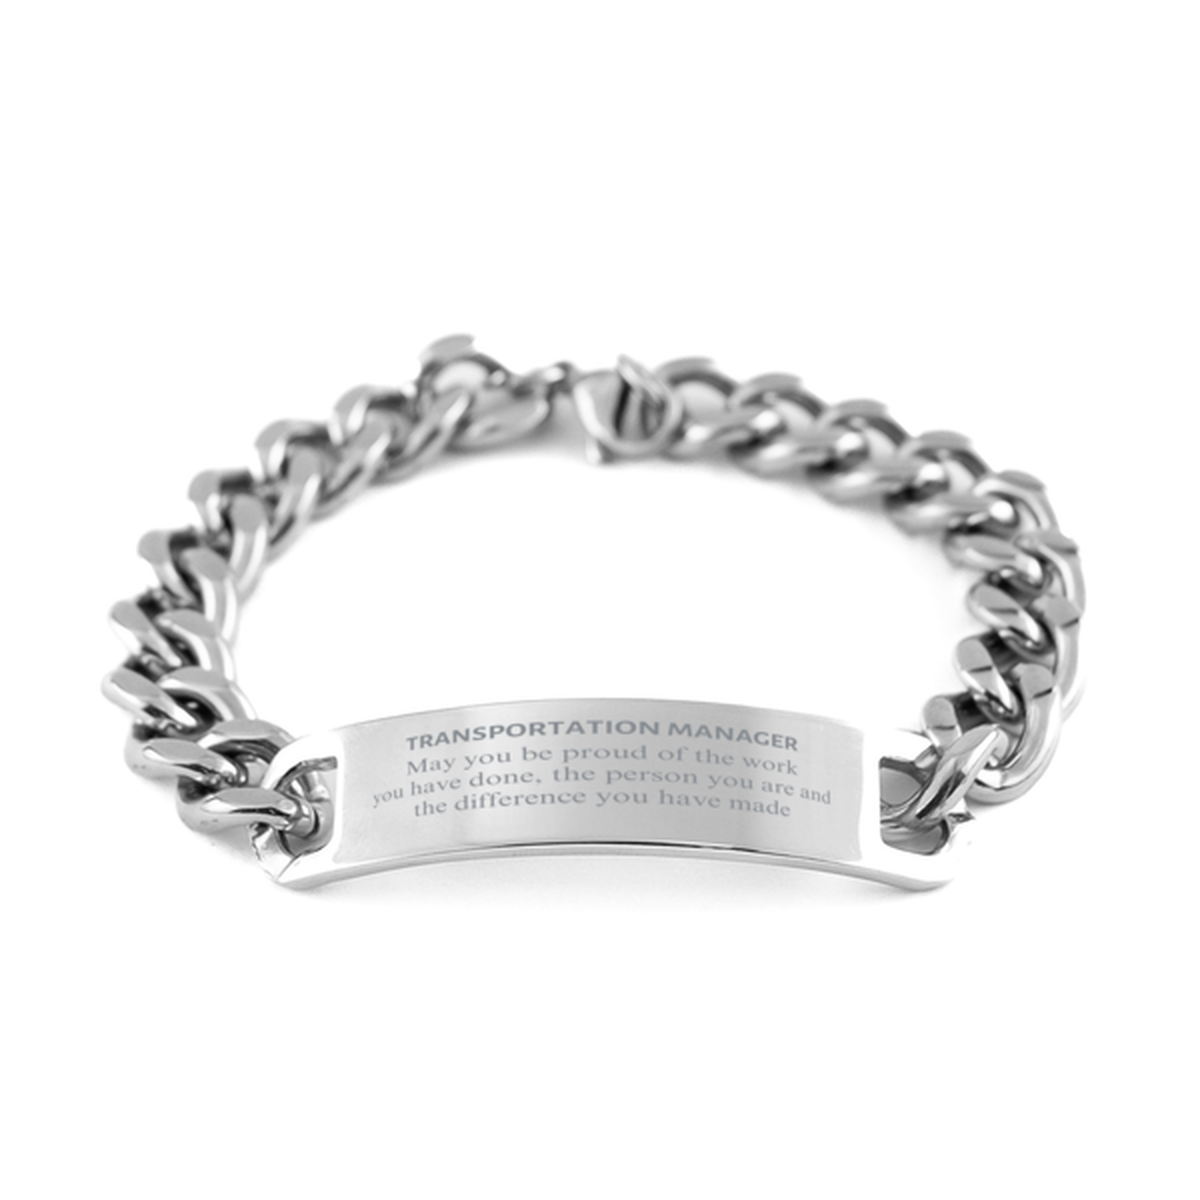 Transportation Manager May you be proud of the work you have done, Retirement Transportation Manager Cuban Chain Stainless Steel Bracelet for Colleague Appreciation Gifts Amazing for Transportation Manager